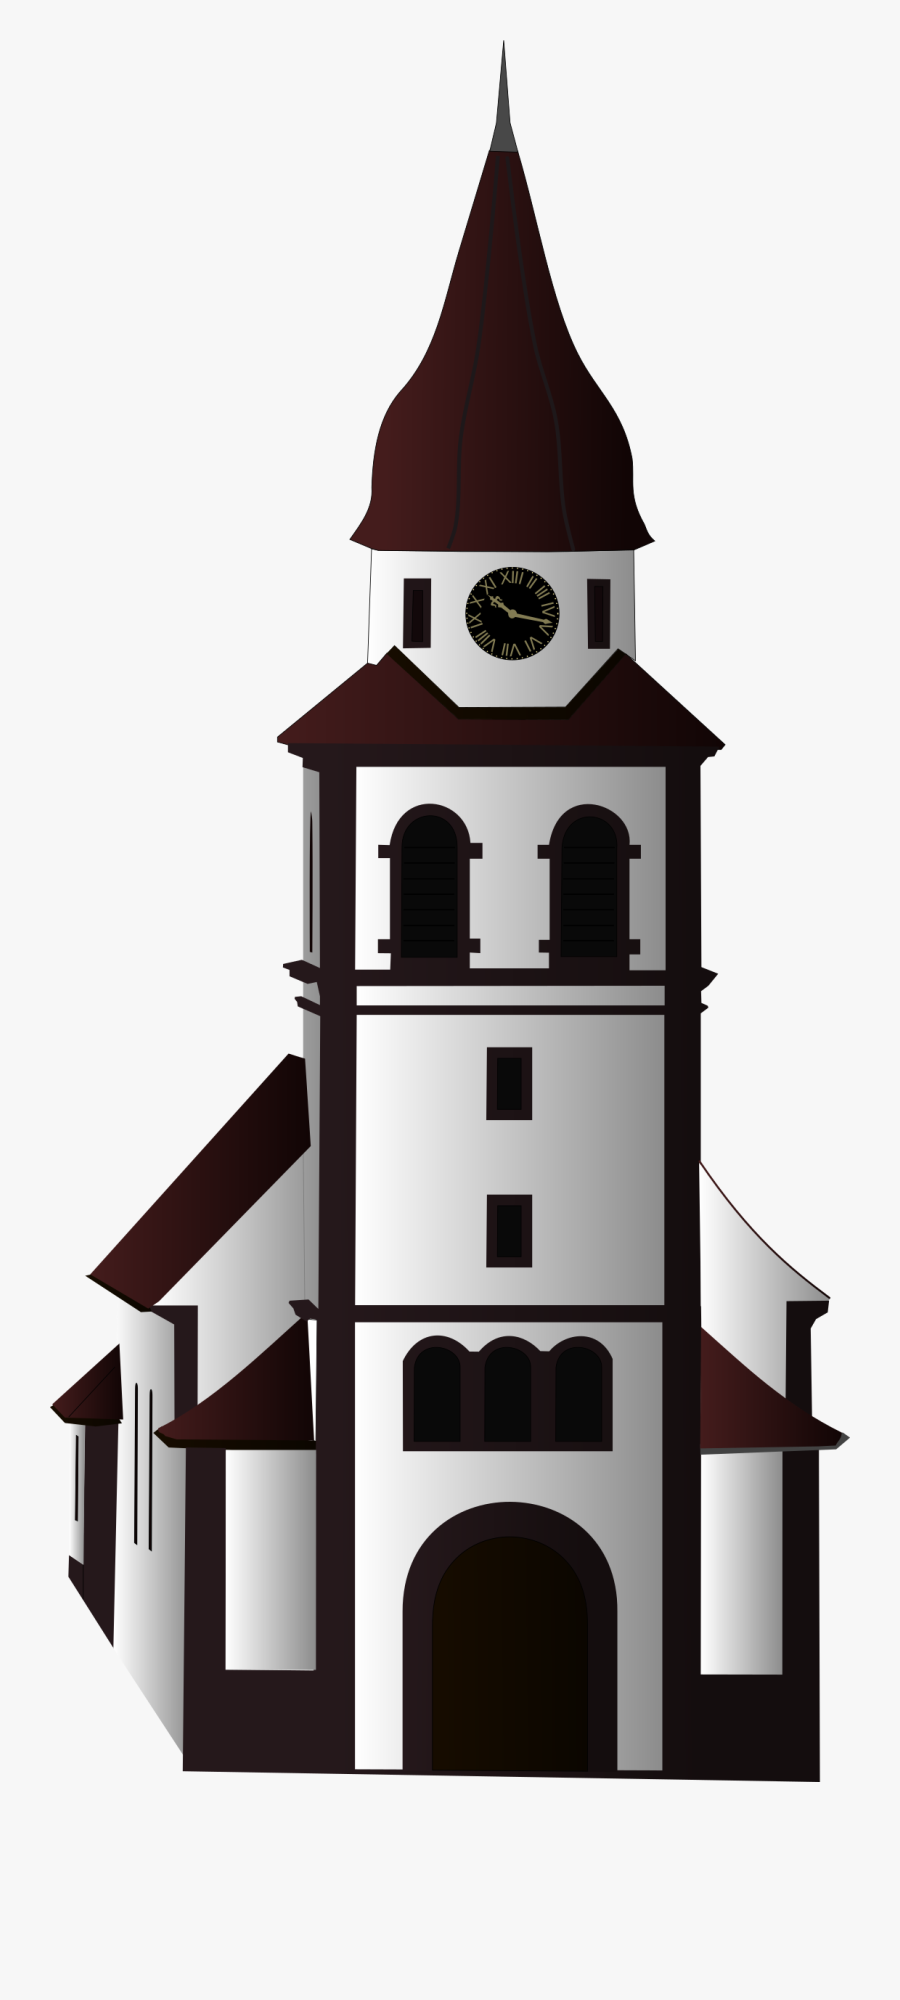 Thumb Image - Animated Picture Of A Church, Transparent Clipart